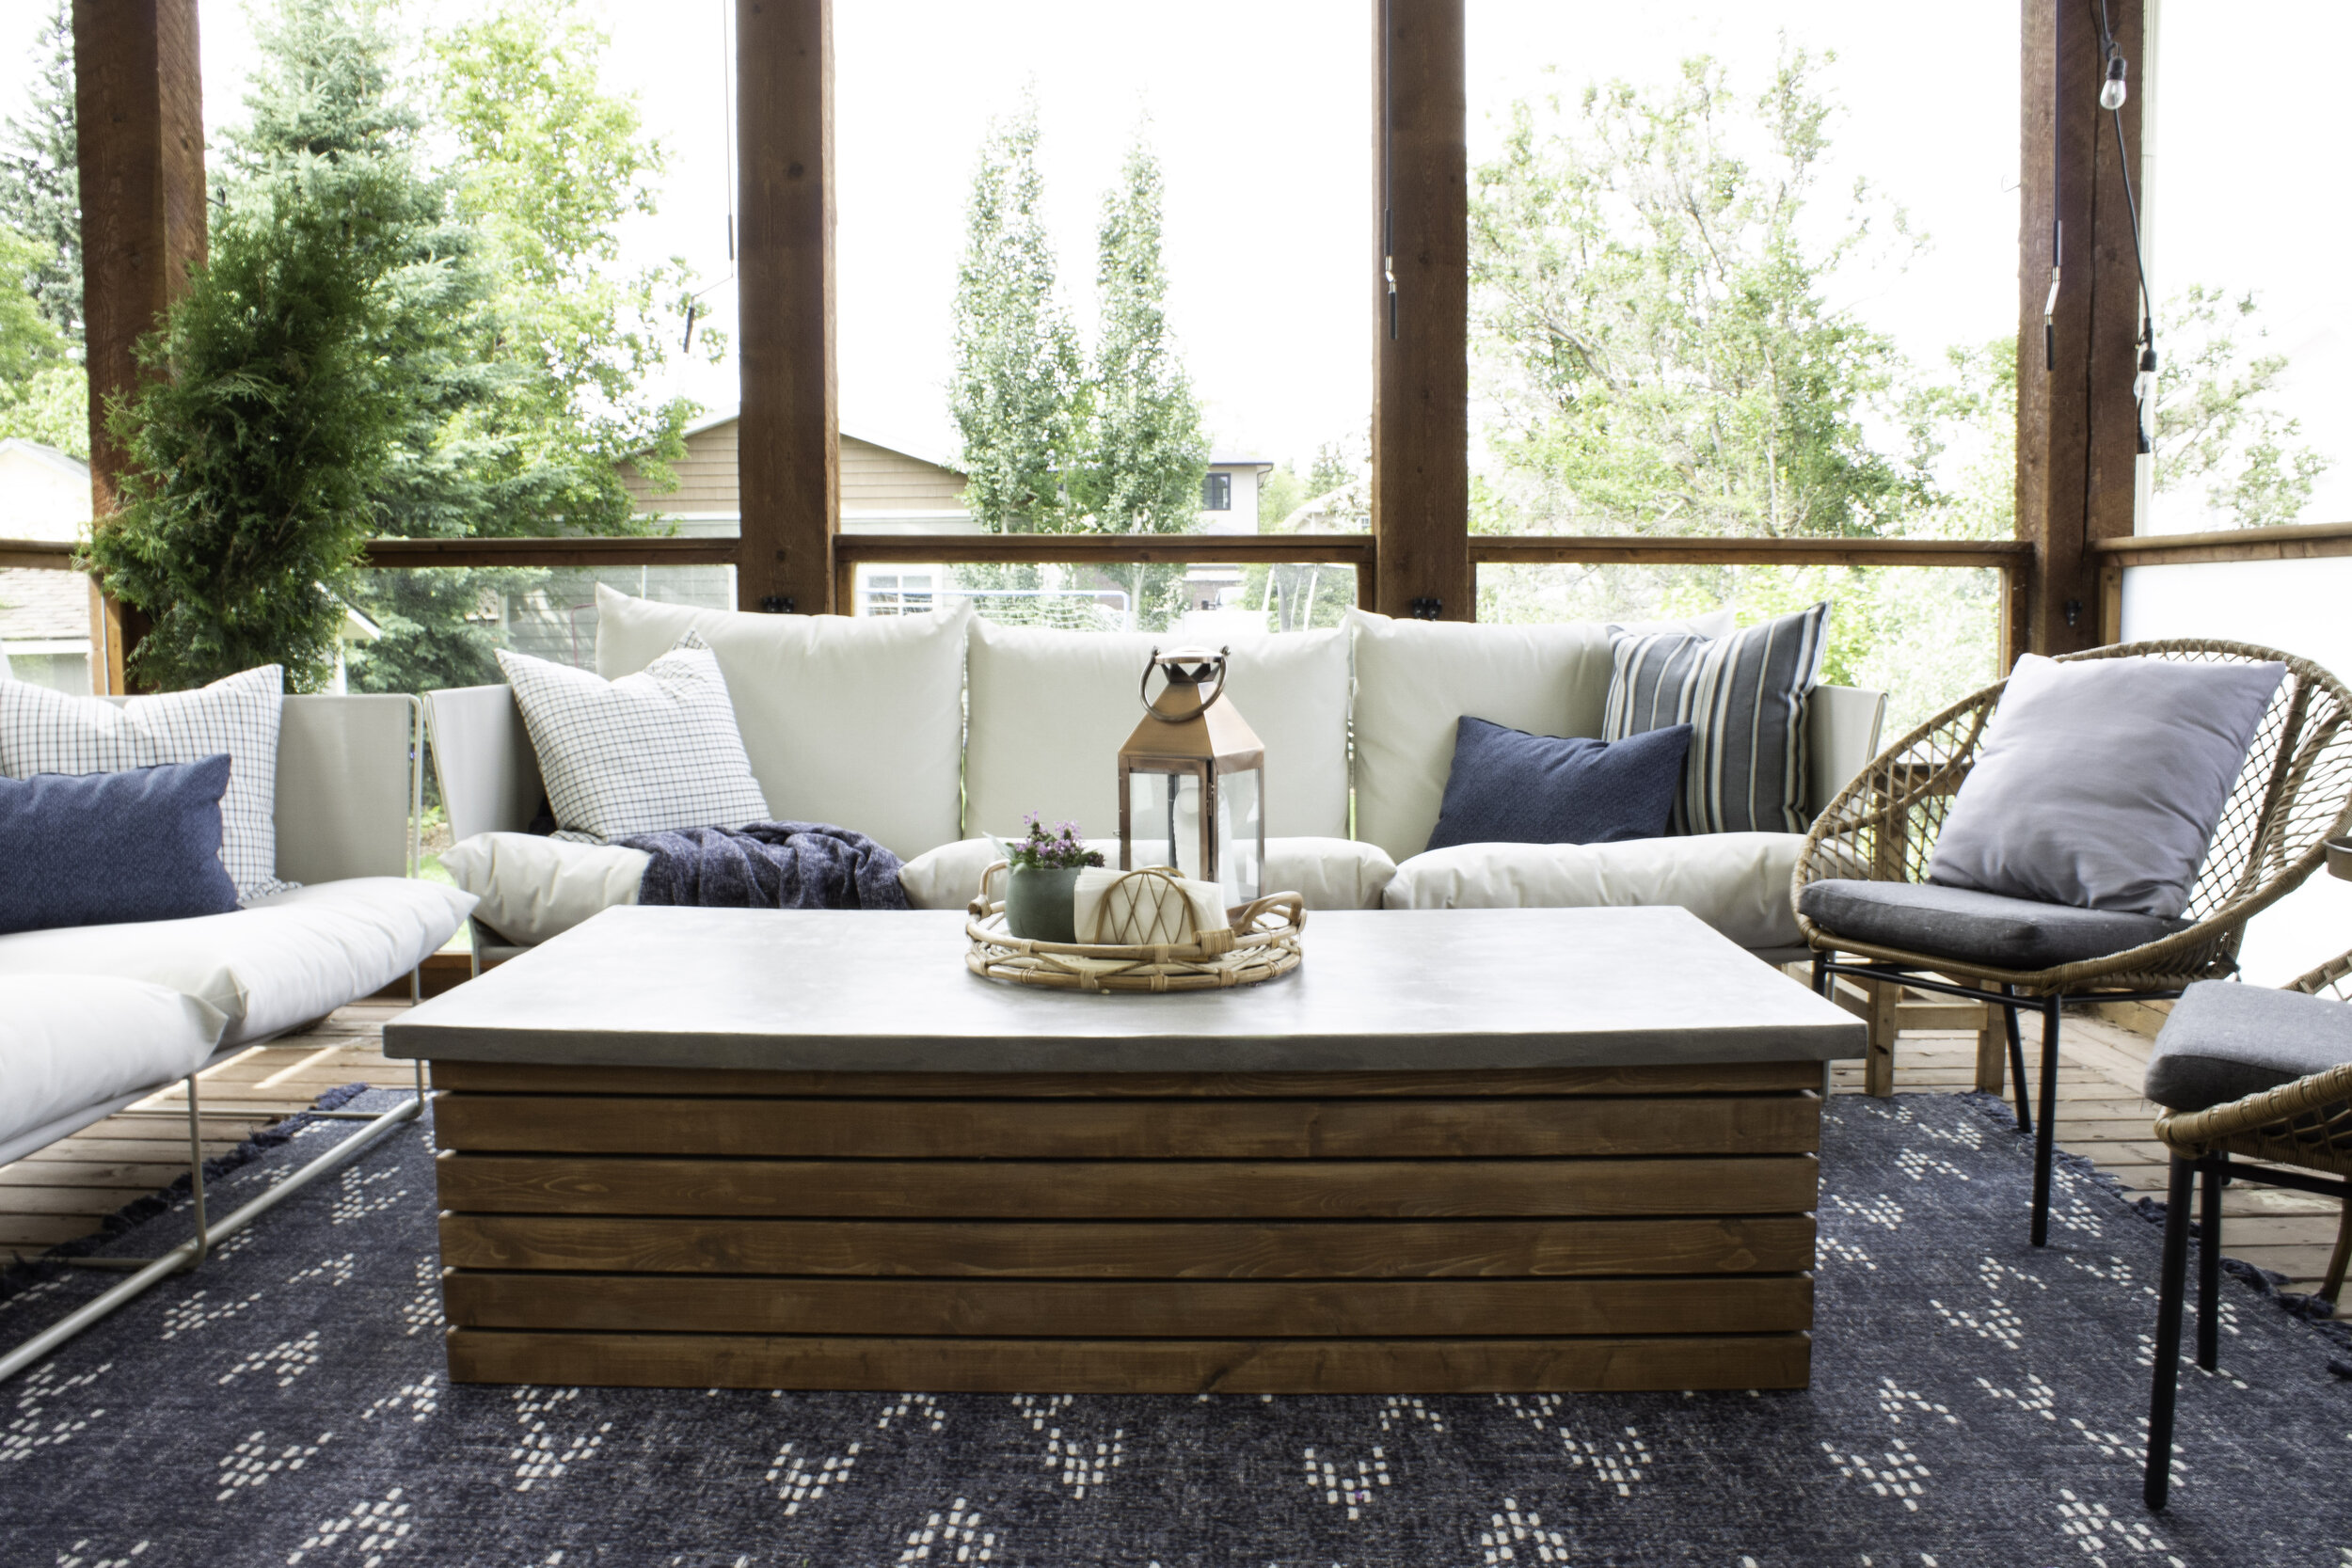 outdoor patio with outdoor couches, blue outdoor rug, wicker end chairs, and a concrete topped outdoor table with wood slats